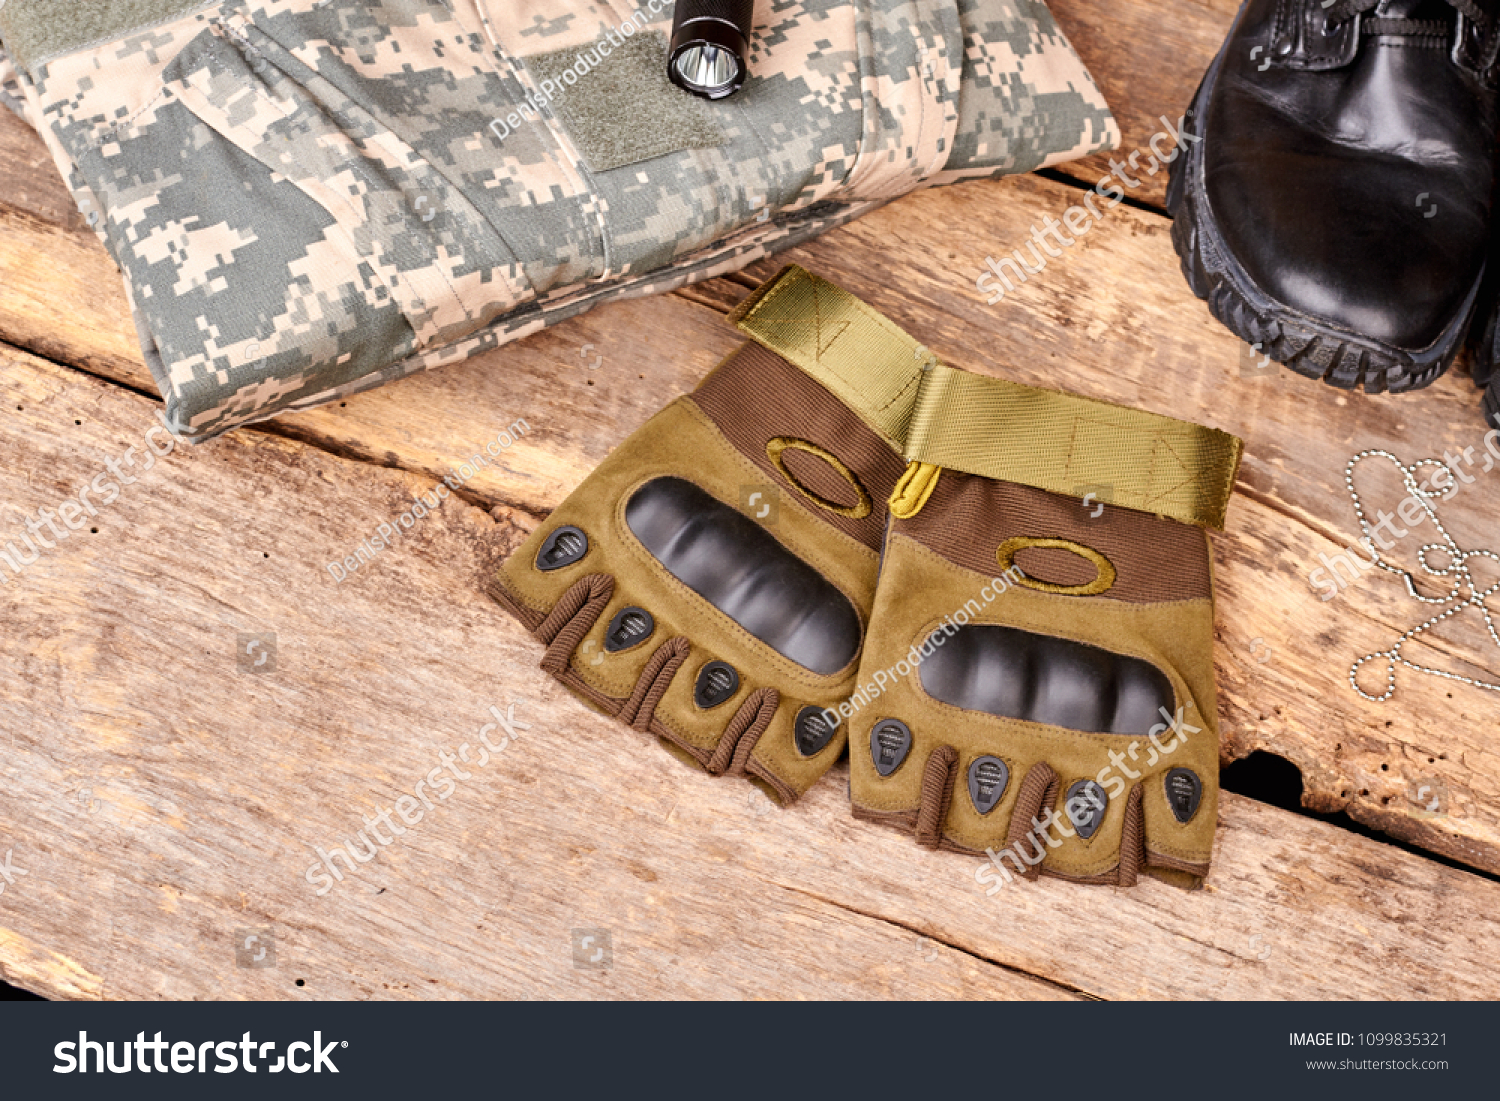 Pair of fingerless gloves and camouflage clothes on wood. Black shoe and torch. Flat lay, top view. #1099835321